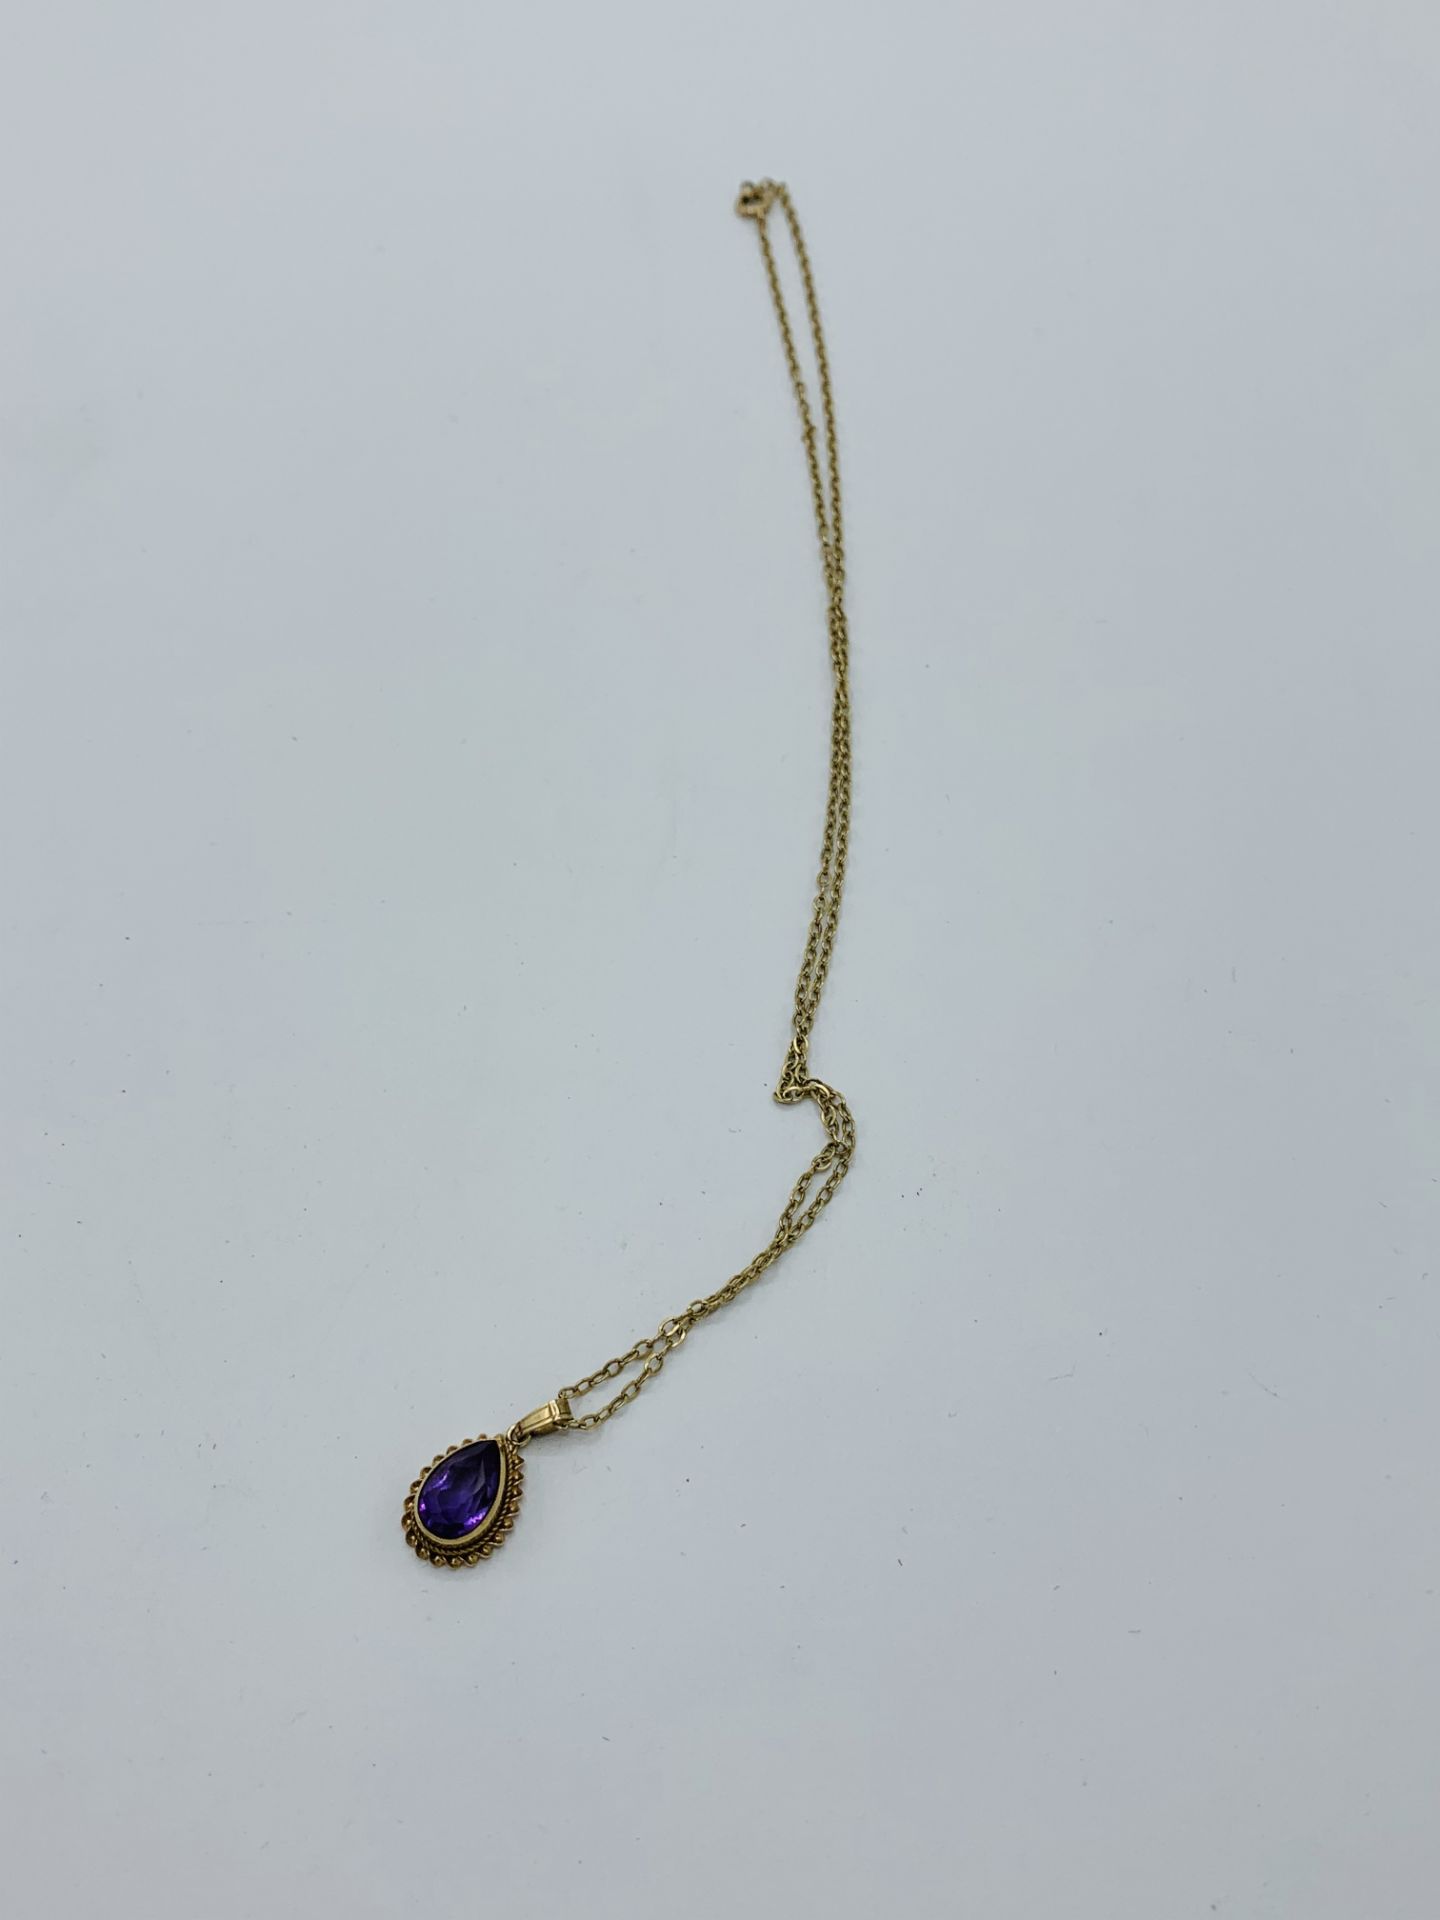 9ct yellow gold amethyst necklace. Estimate £30-40. - Image 3 of 3